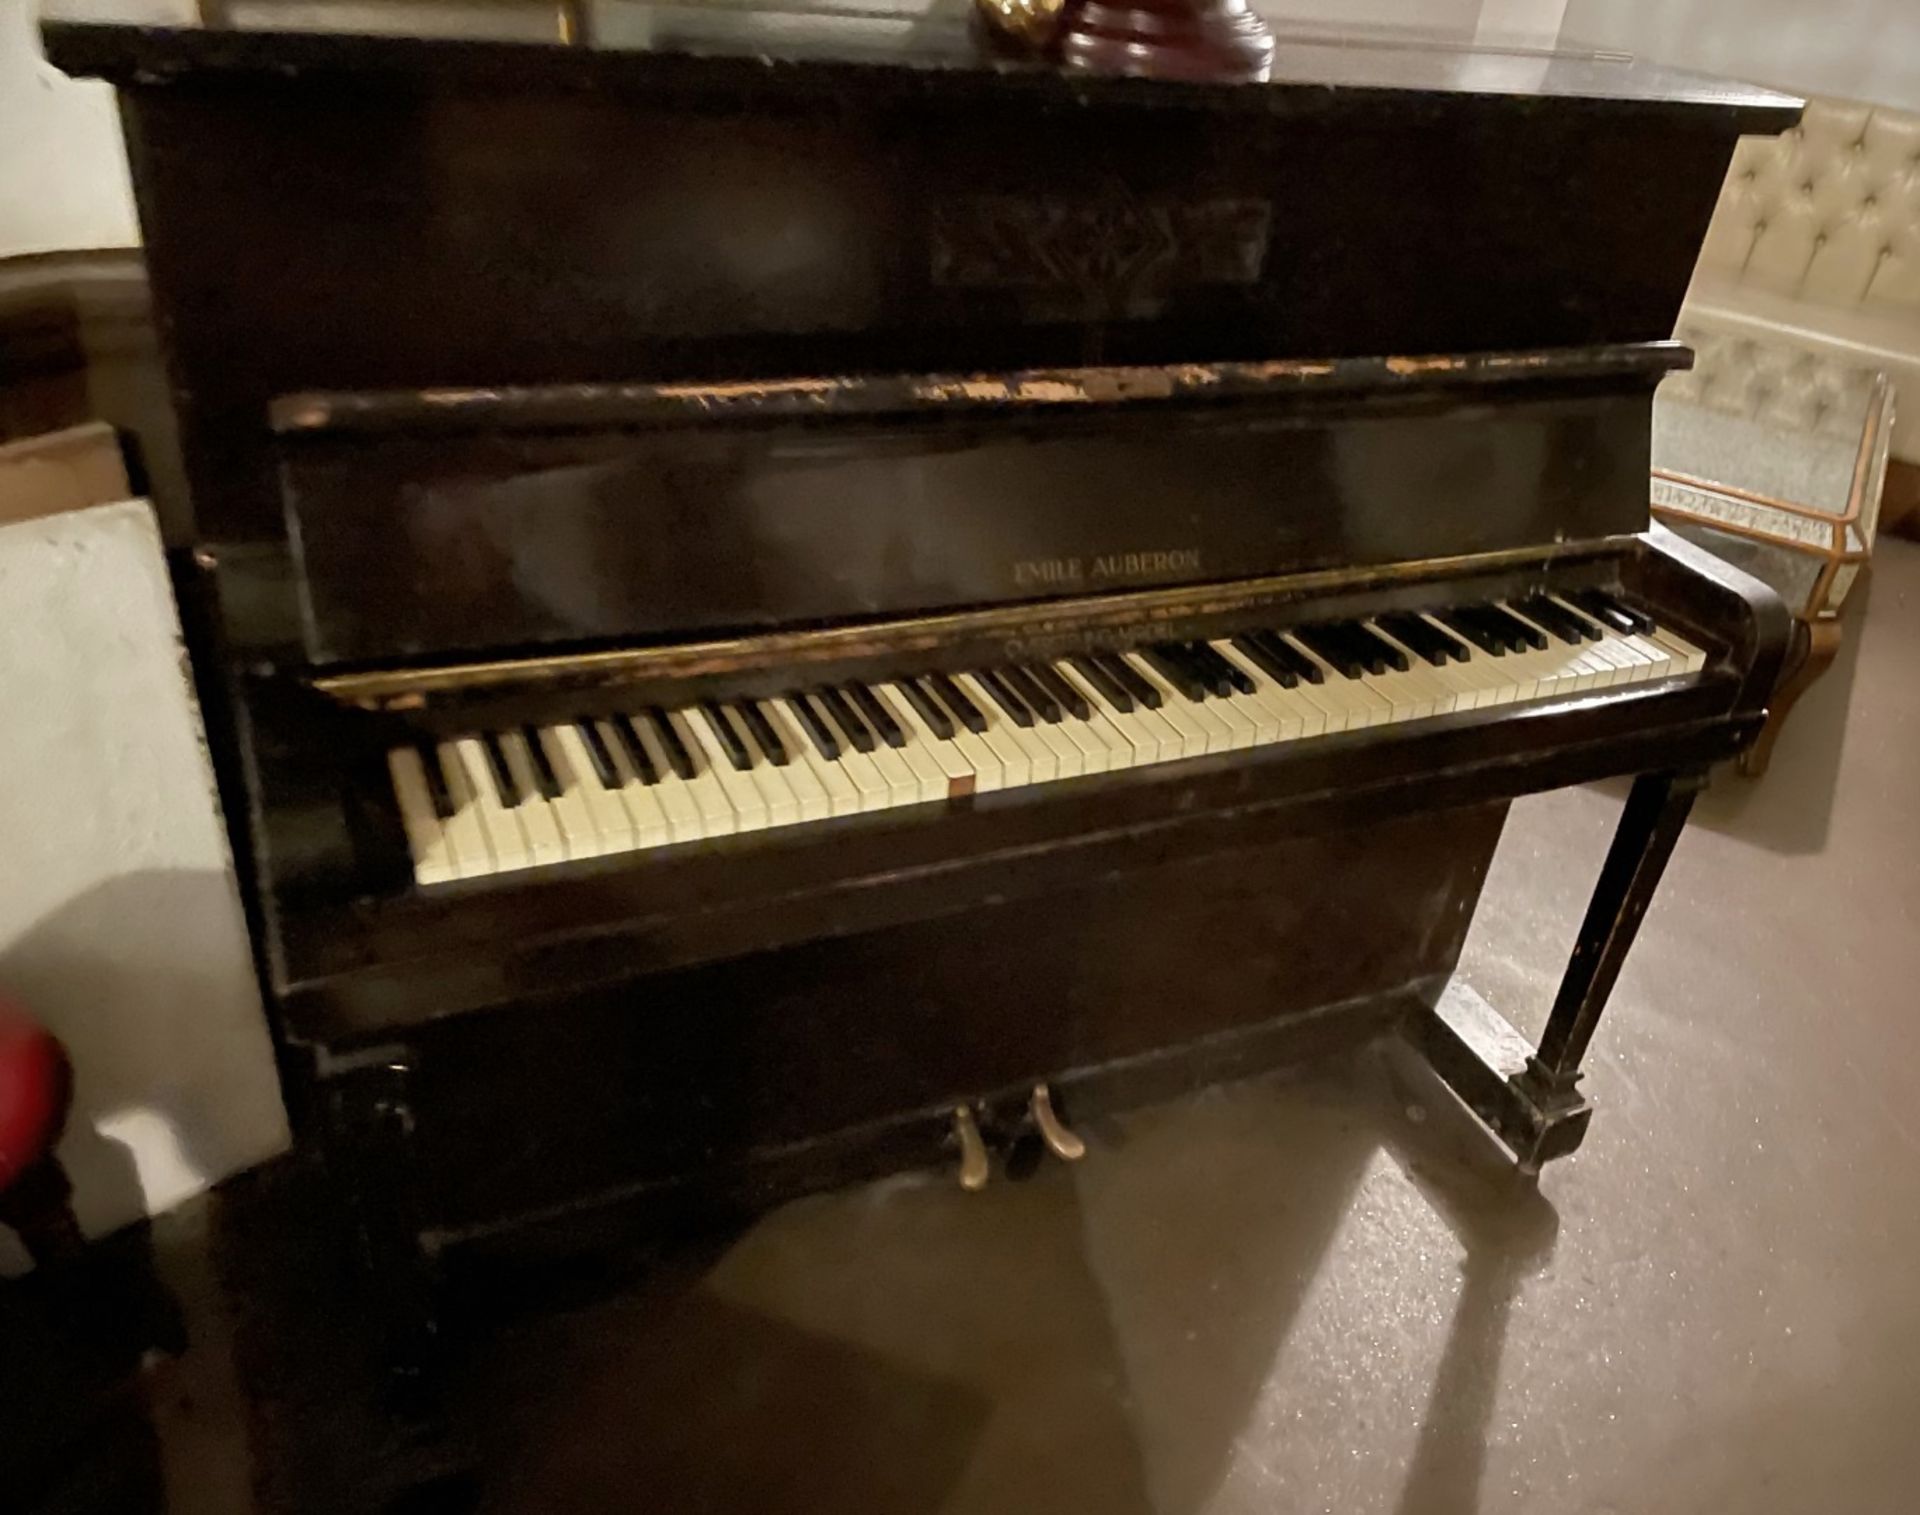 1 x Vintage EMILE AUBERON Mahogany Overstrung Upright Piano - Ref: 123 - CL909 - Location: London, - Image 2 of 13